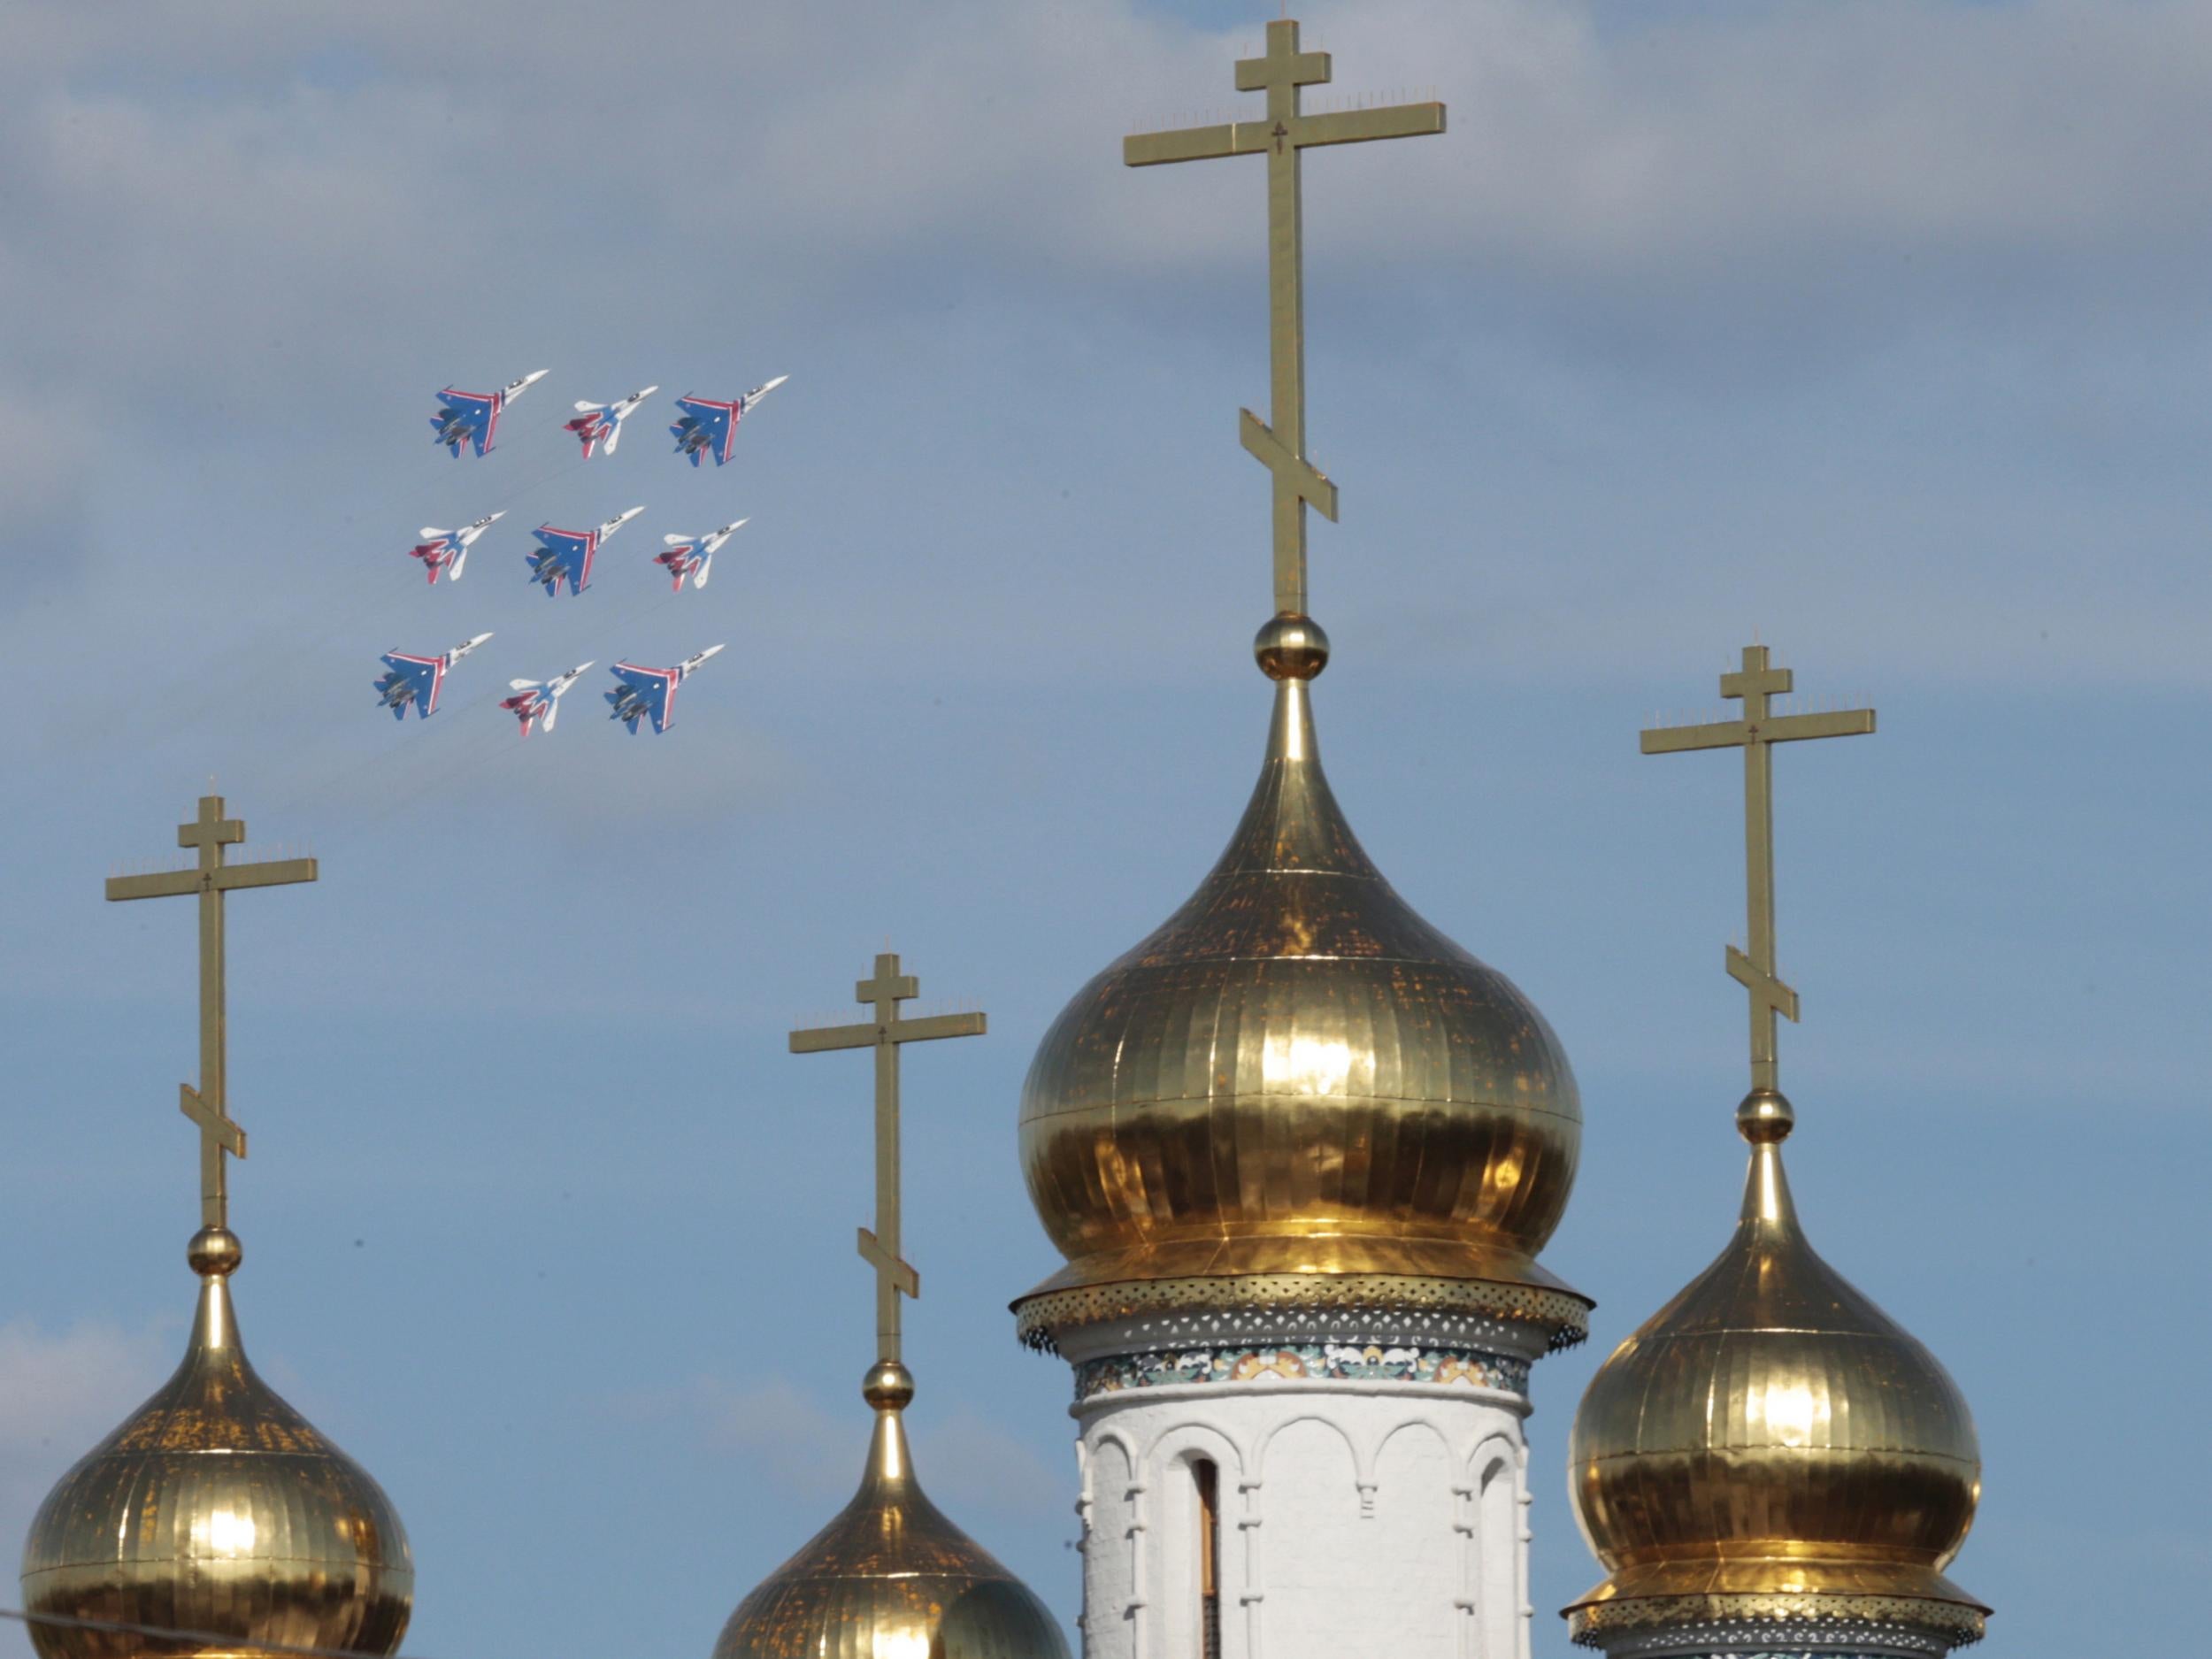 The Russian Orthodox Church continues to be a dominant force in the country's affairs under President Putin